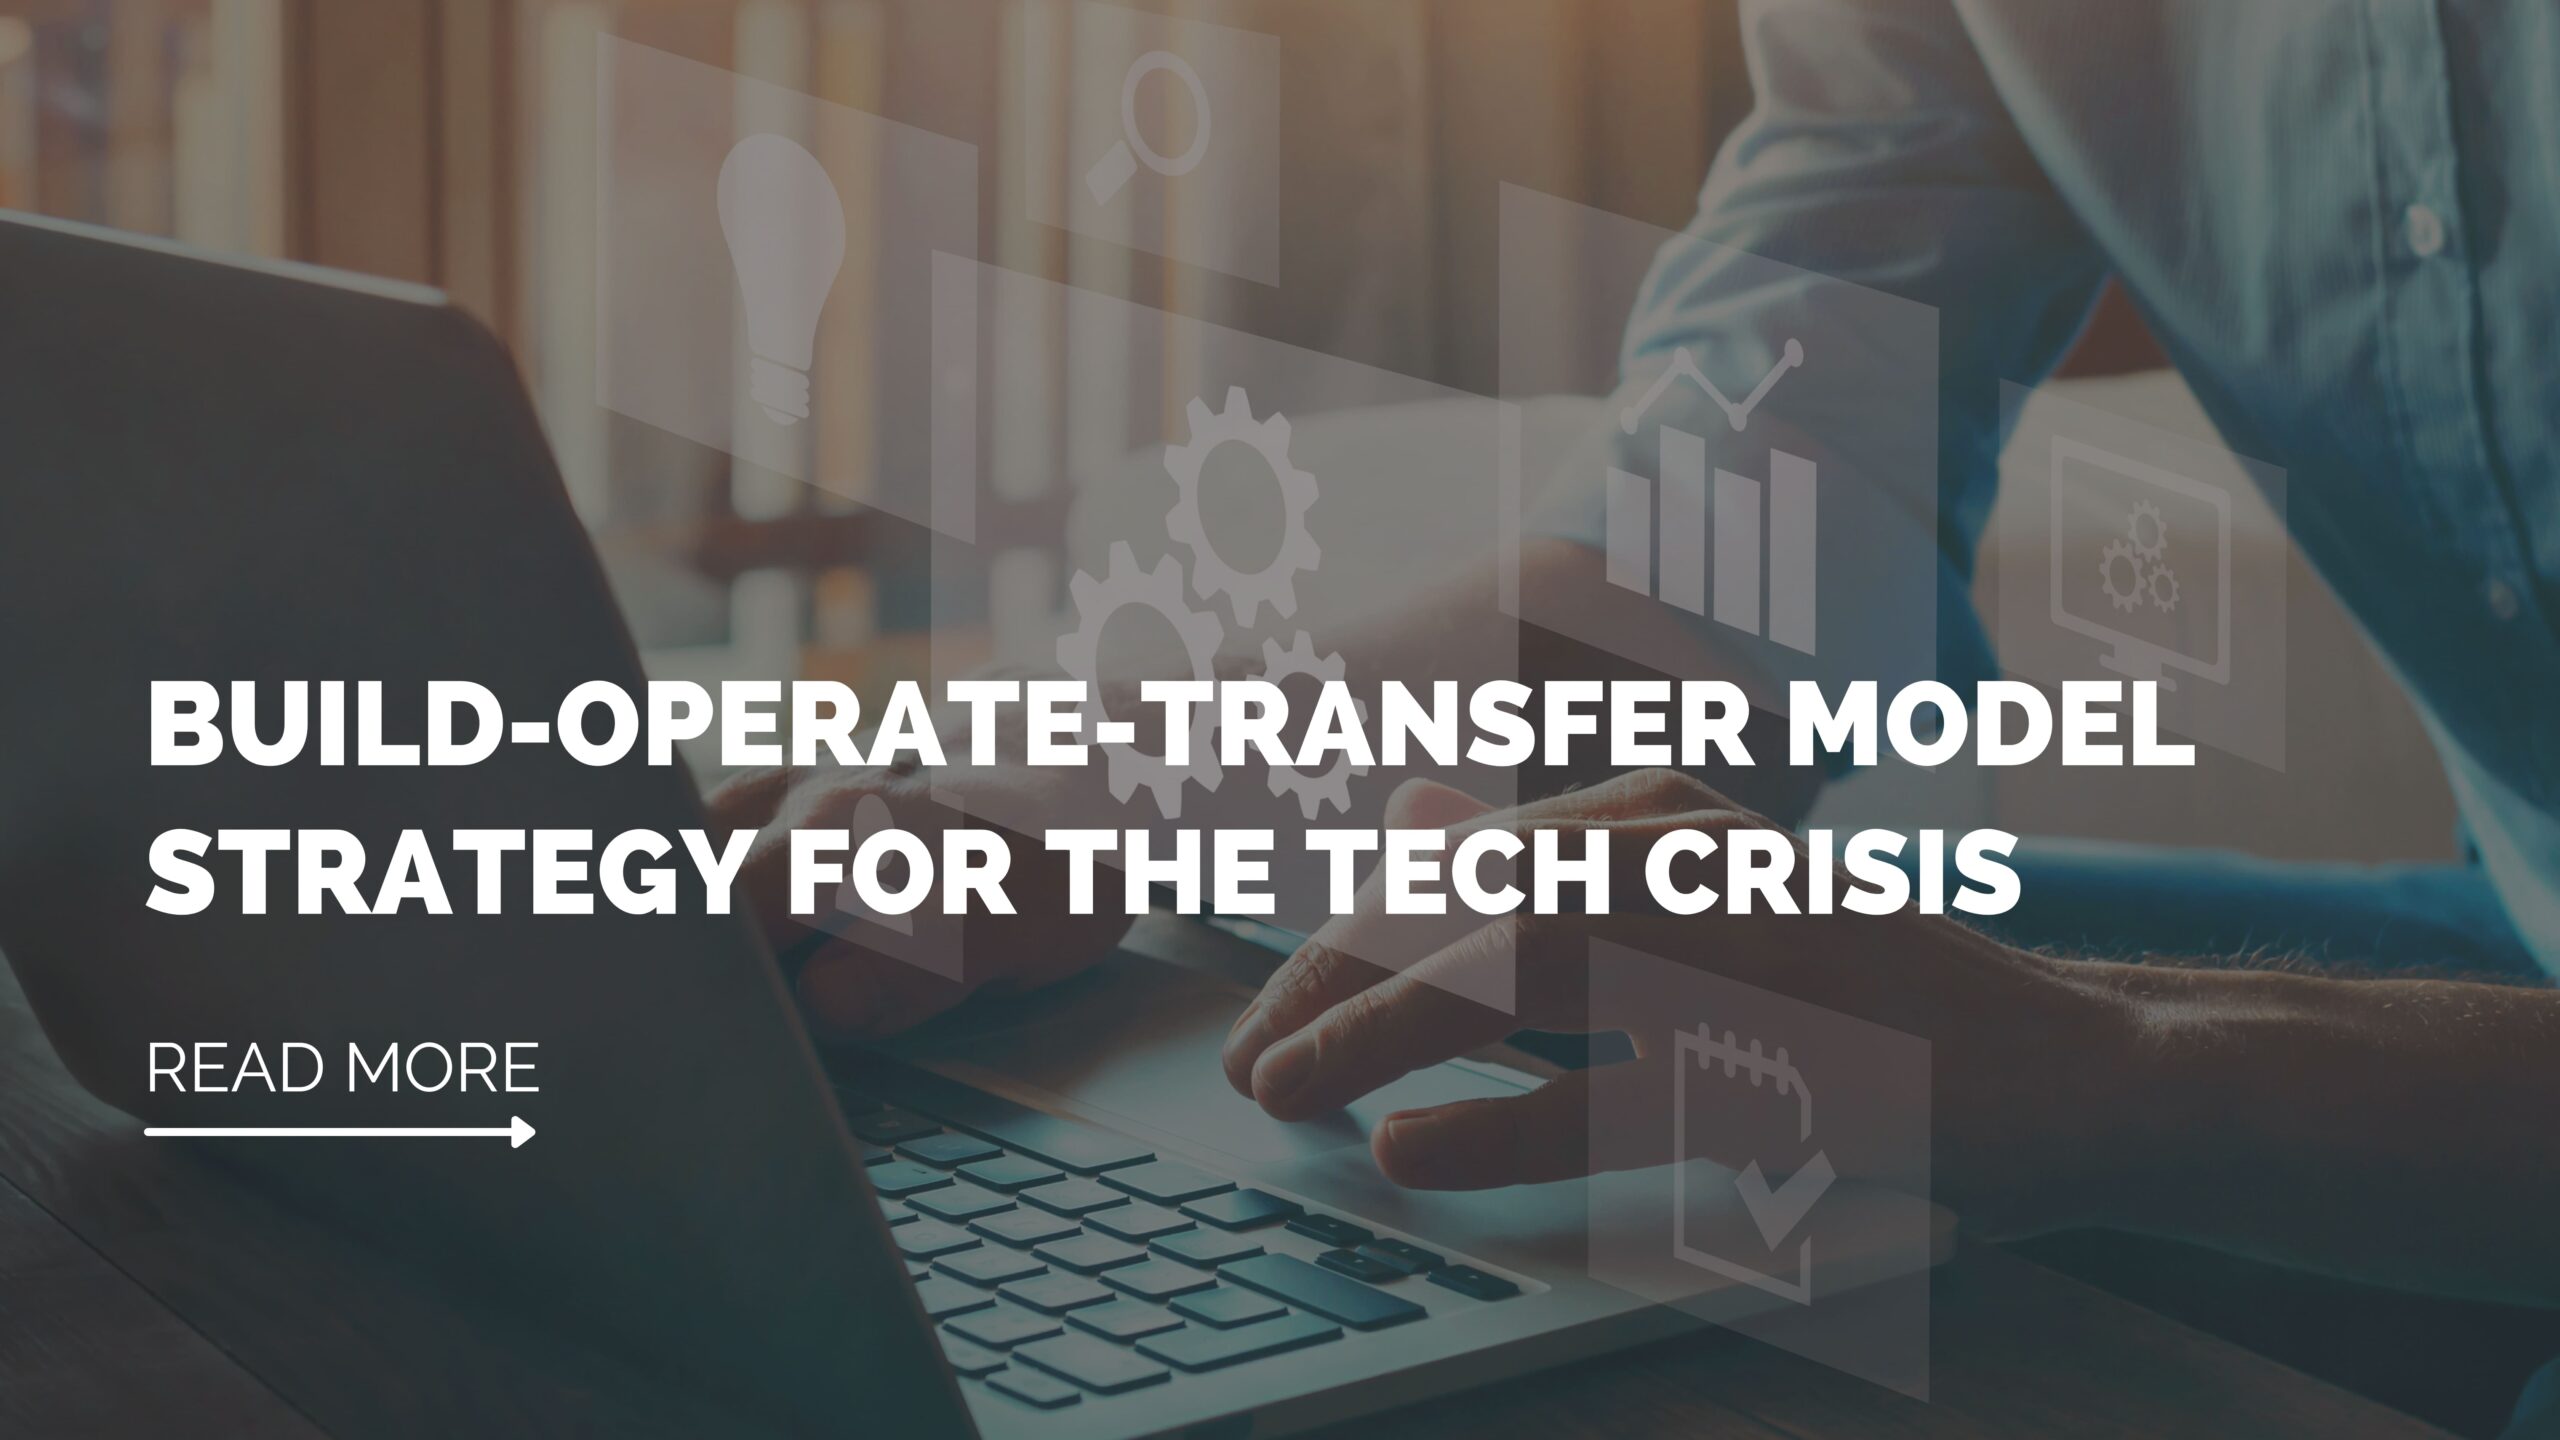 Build operate transfer model strategy for the tech crisis